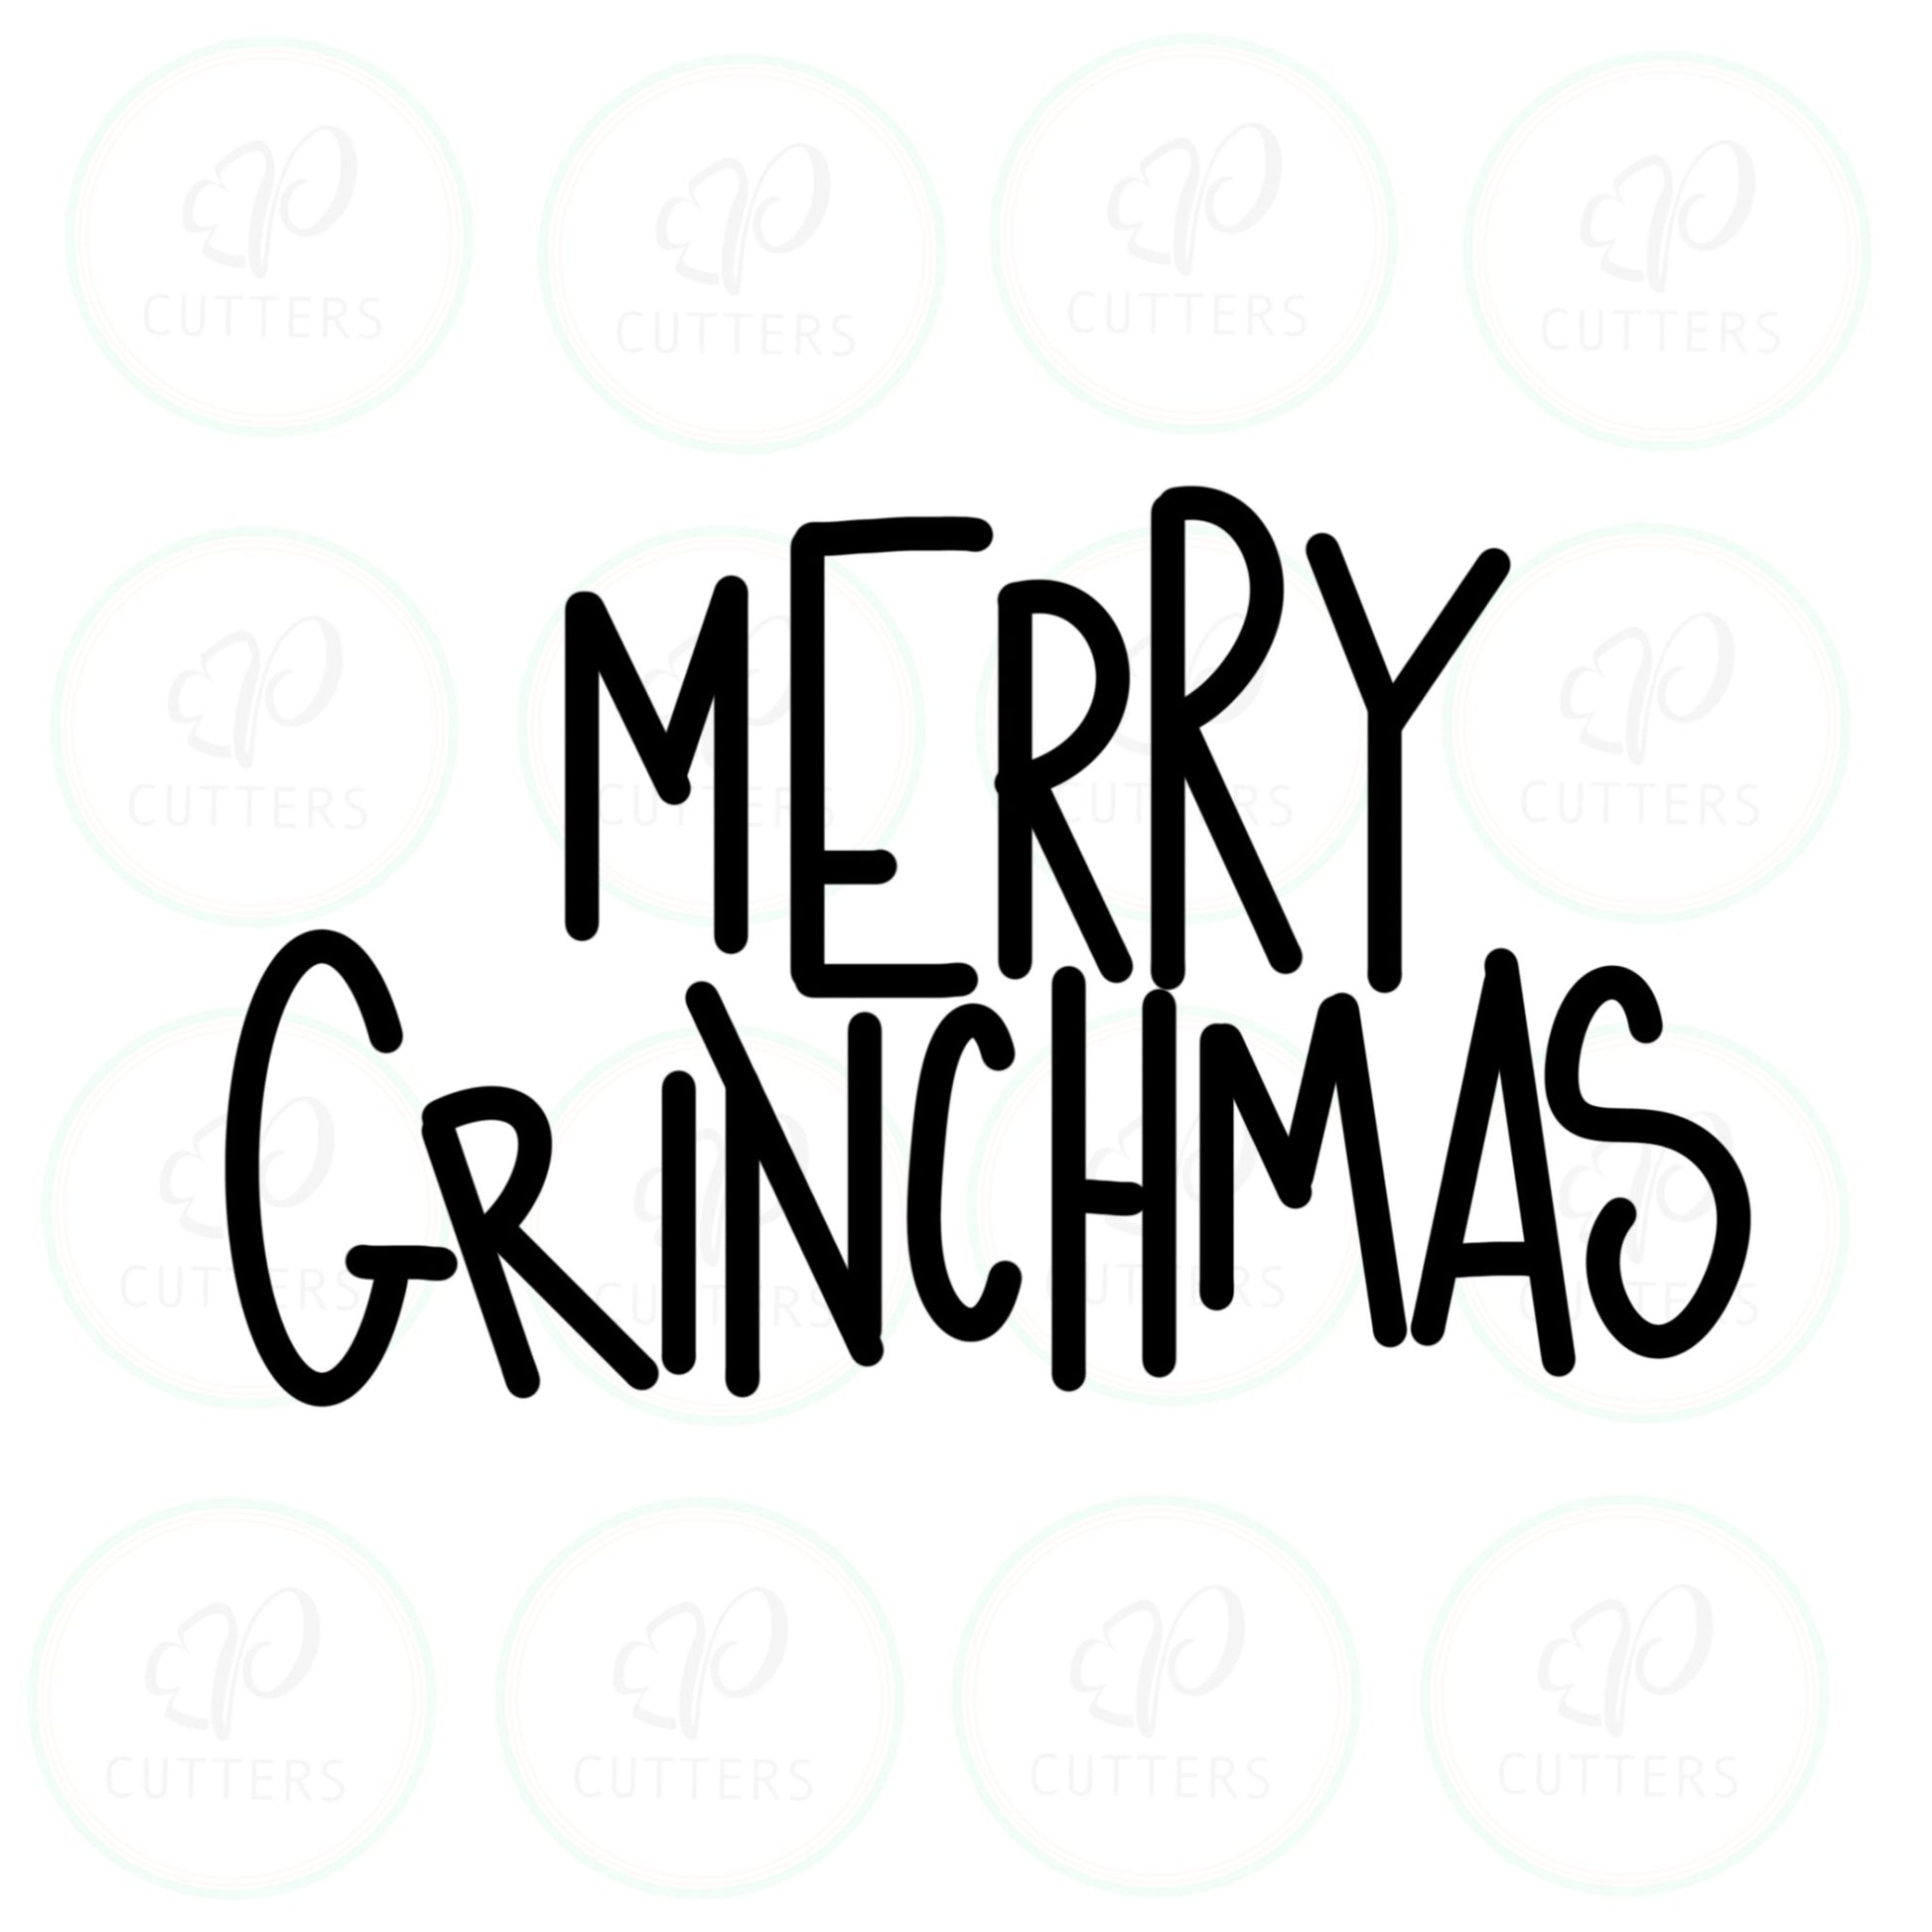 Merry Grinchmas Lettering Plaque Cookie Cutter - Periwinkles Cutters